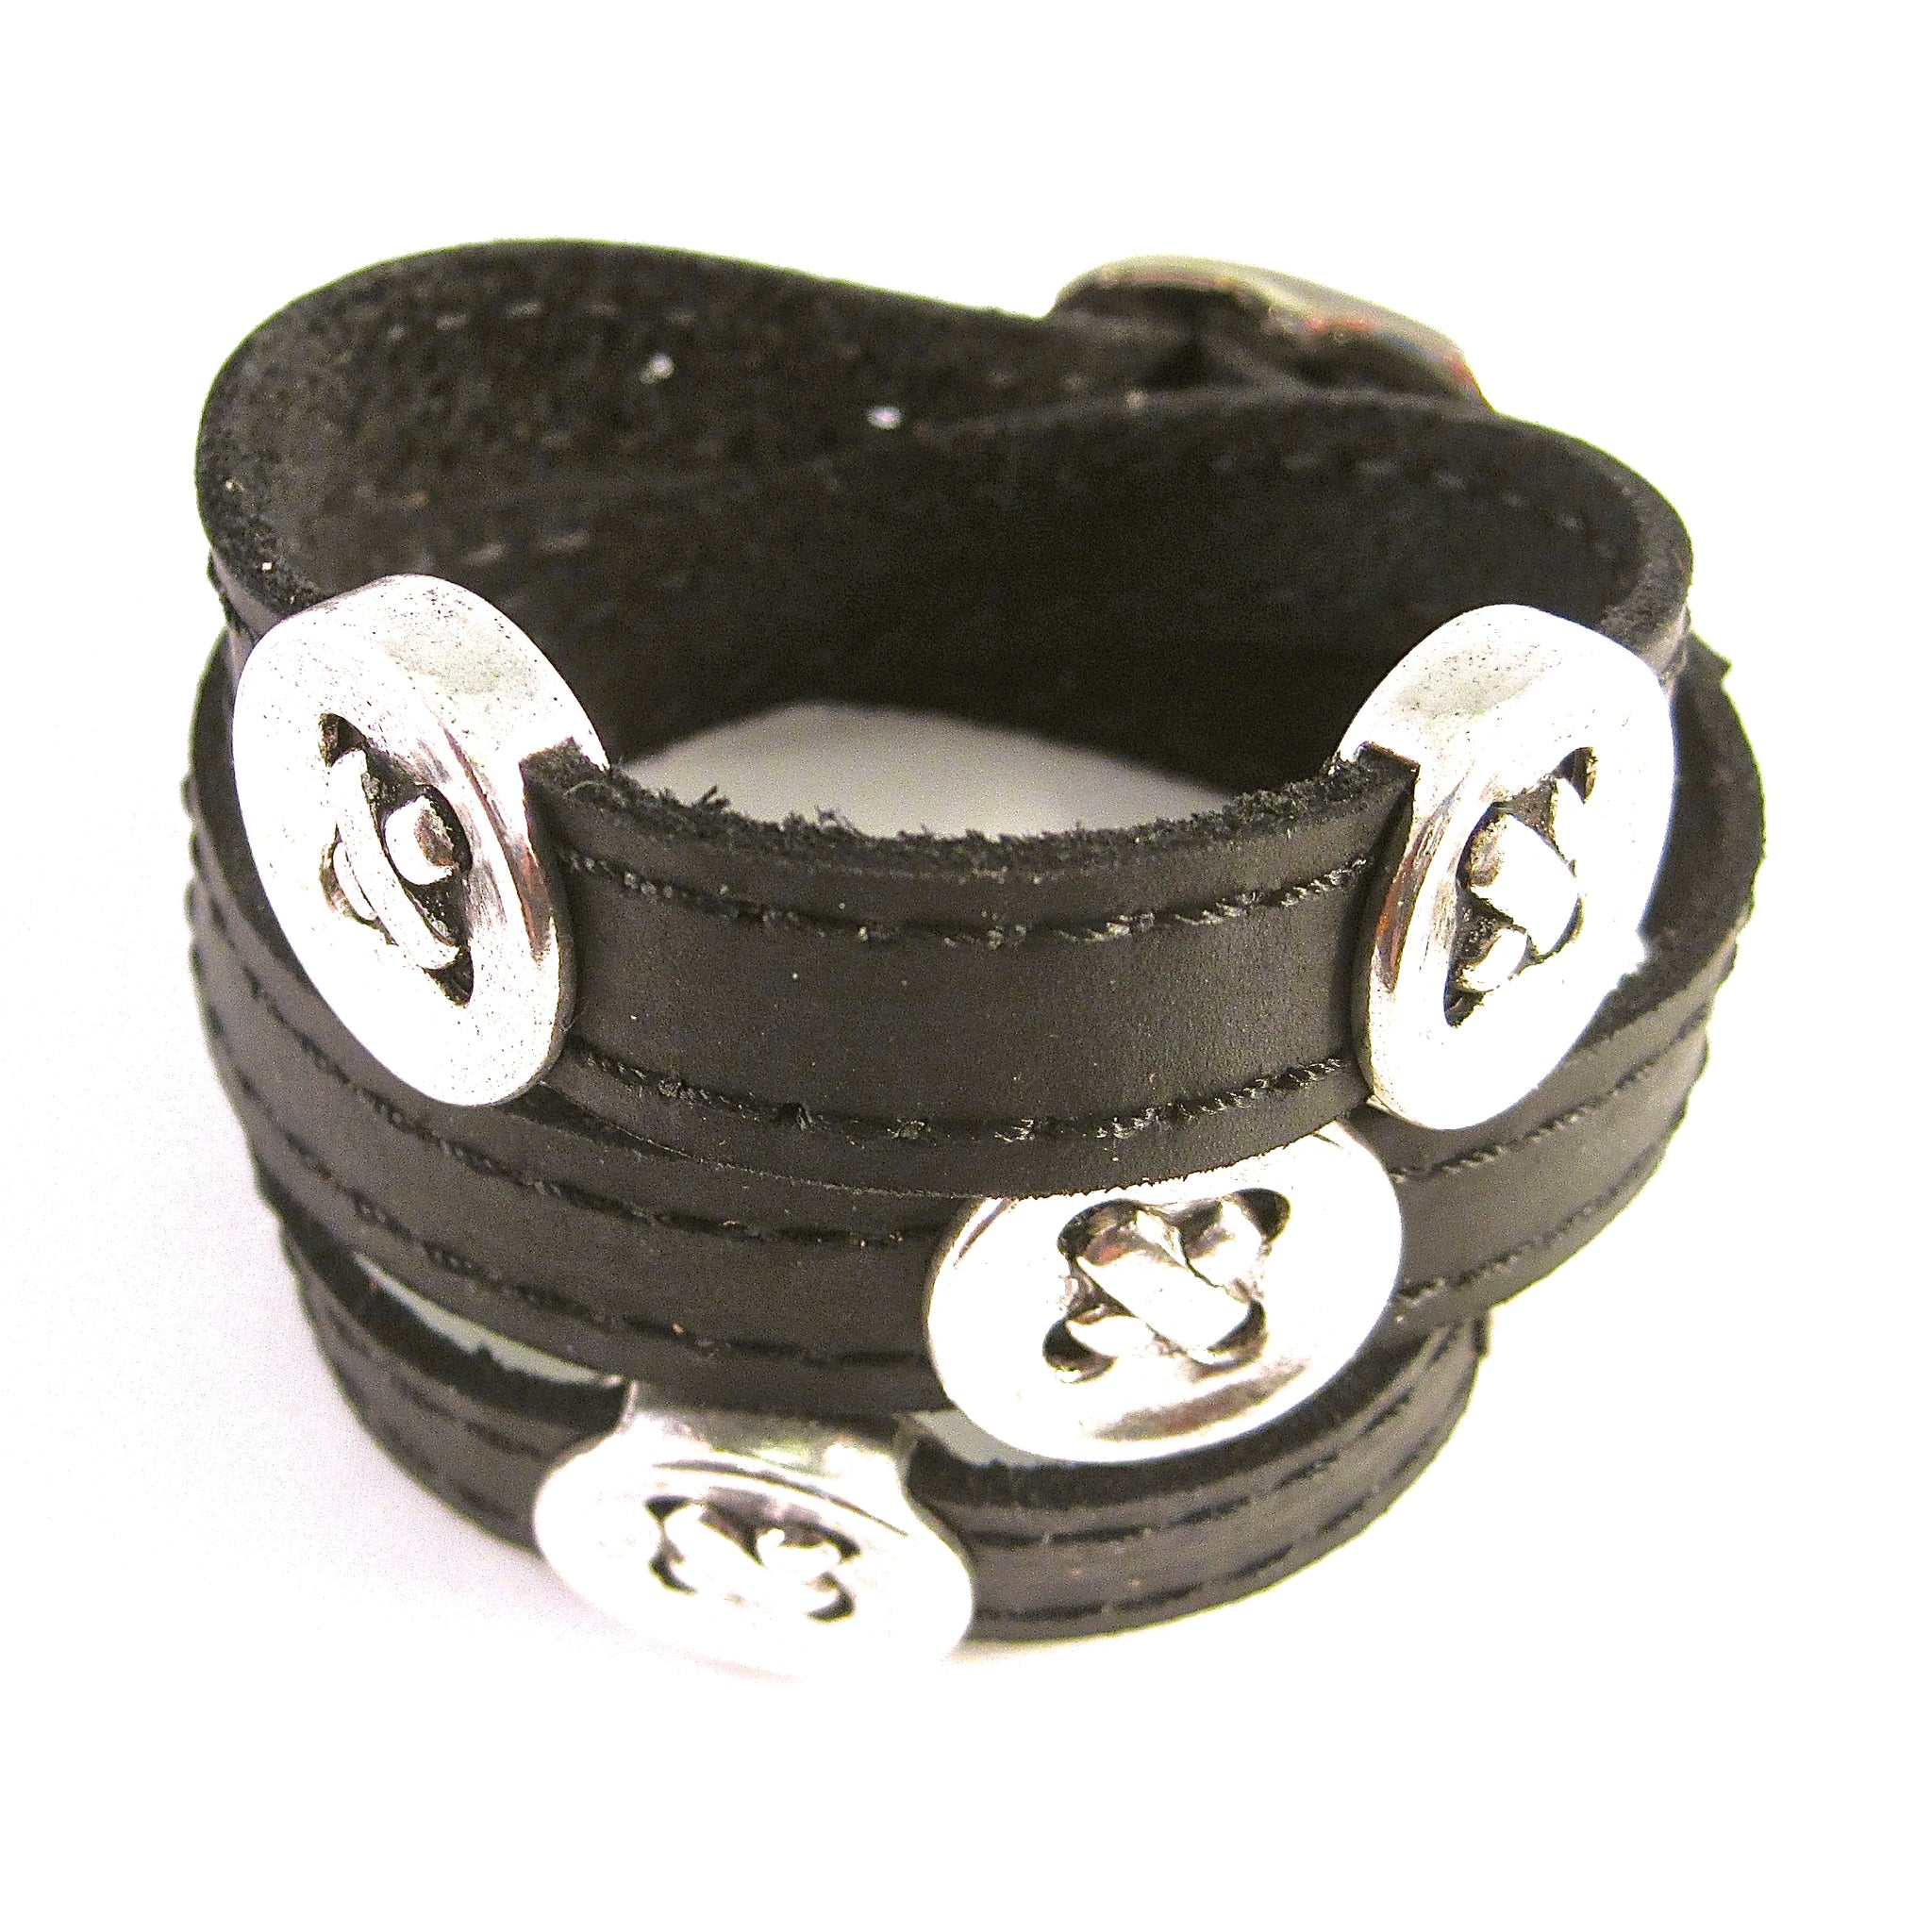 LEATHER WRAPAROUND WITH FIVE METAL BUTTONS by nyet jewelry.